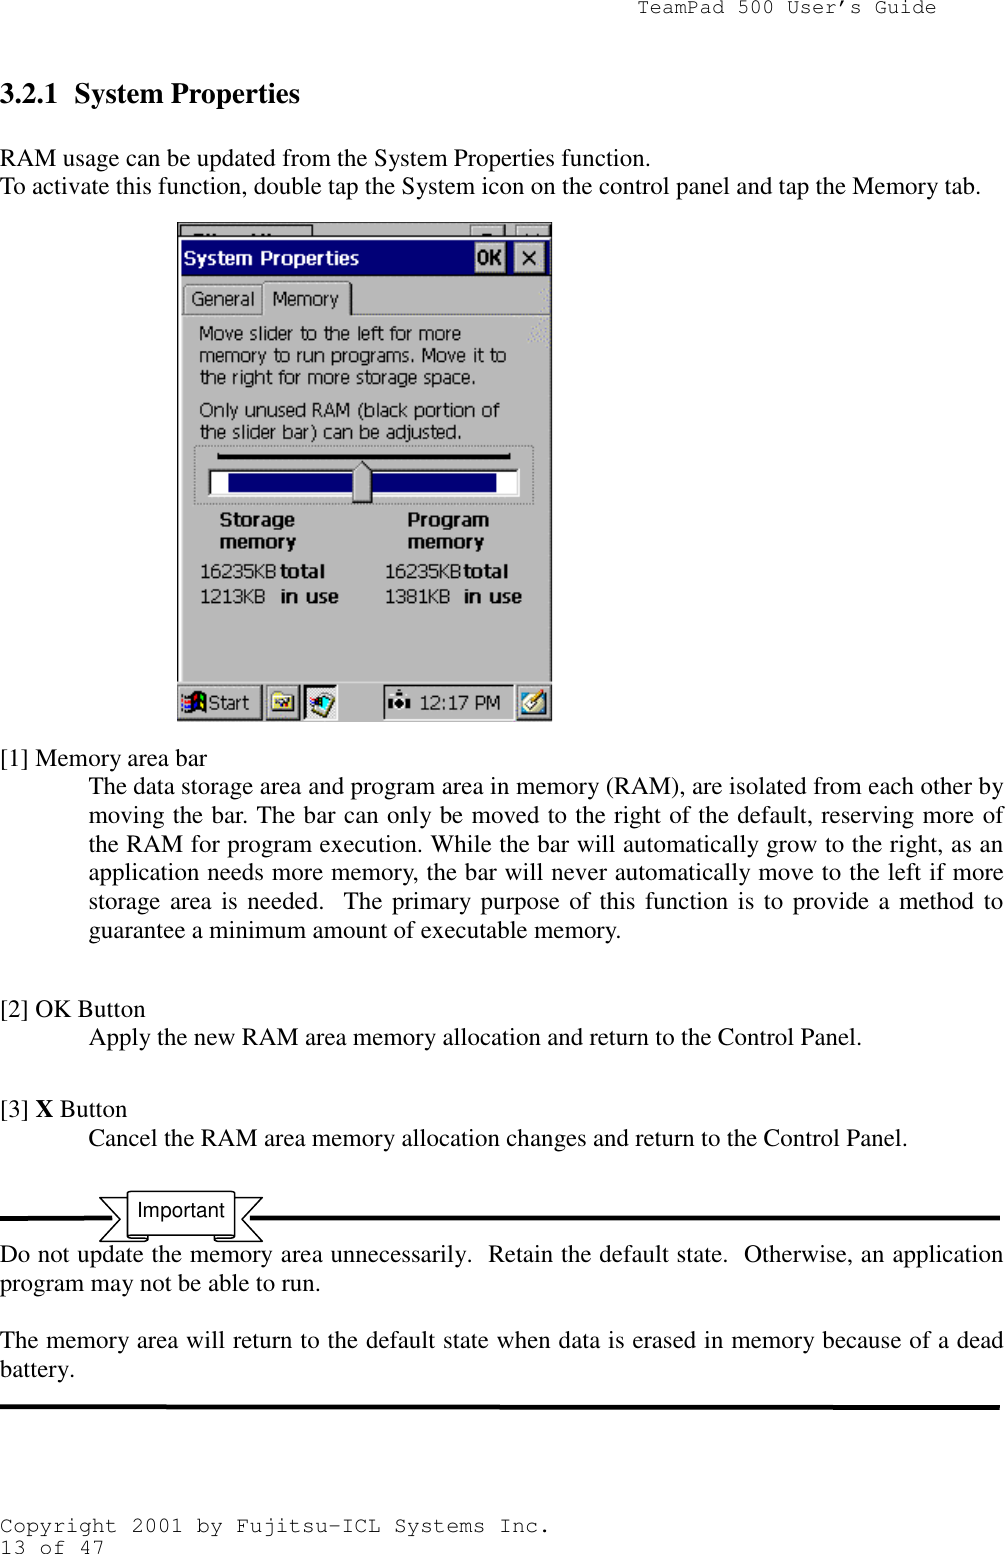                TeamPad 500 User’s GuideCopyright 2001 by Fujitsu-ICL Systems Inc.13 of 473.2.1 System PropertiesRAM usage can be updated from the System Properties function.To activate this function, double tap the System icon on the control panel and tap the Memory tab.[1] Memory area barThe data storage area and program area in memory (RAM), are isolated from each other bymoving the bar. The bar can only be moved to the right of the default, reserving more ofthe RAM for program execution. While the bar will automatically grow to the right, as anapplication needs more memory, the bar will never automatically move to the left if morestorage area is needed.  The primary purpose of this function is to provide a method toguarantee a minimum amount of executable memory.[2] OK ButtonApply the new RAM area memory allocation and return to the Control Panel.[3] X ButtonCancel the RAM area memory allocation changes and return to the Control Panel.Do not update the memory area unnecessarily.  Retain the default state.  Otherwise, an applicationprogram may not be able to run.The memory area will return to the default state when data is erased in memory because of a deadbattery.Important